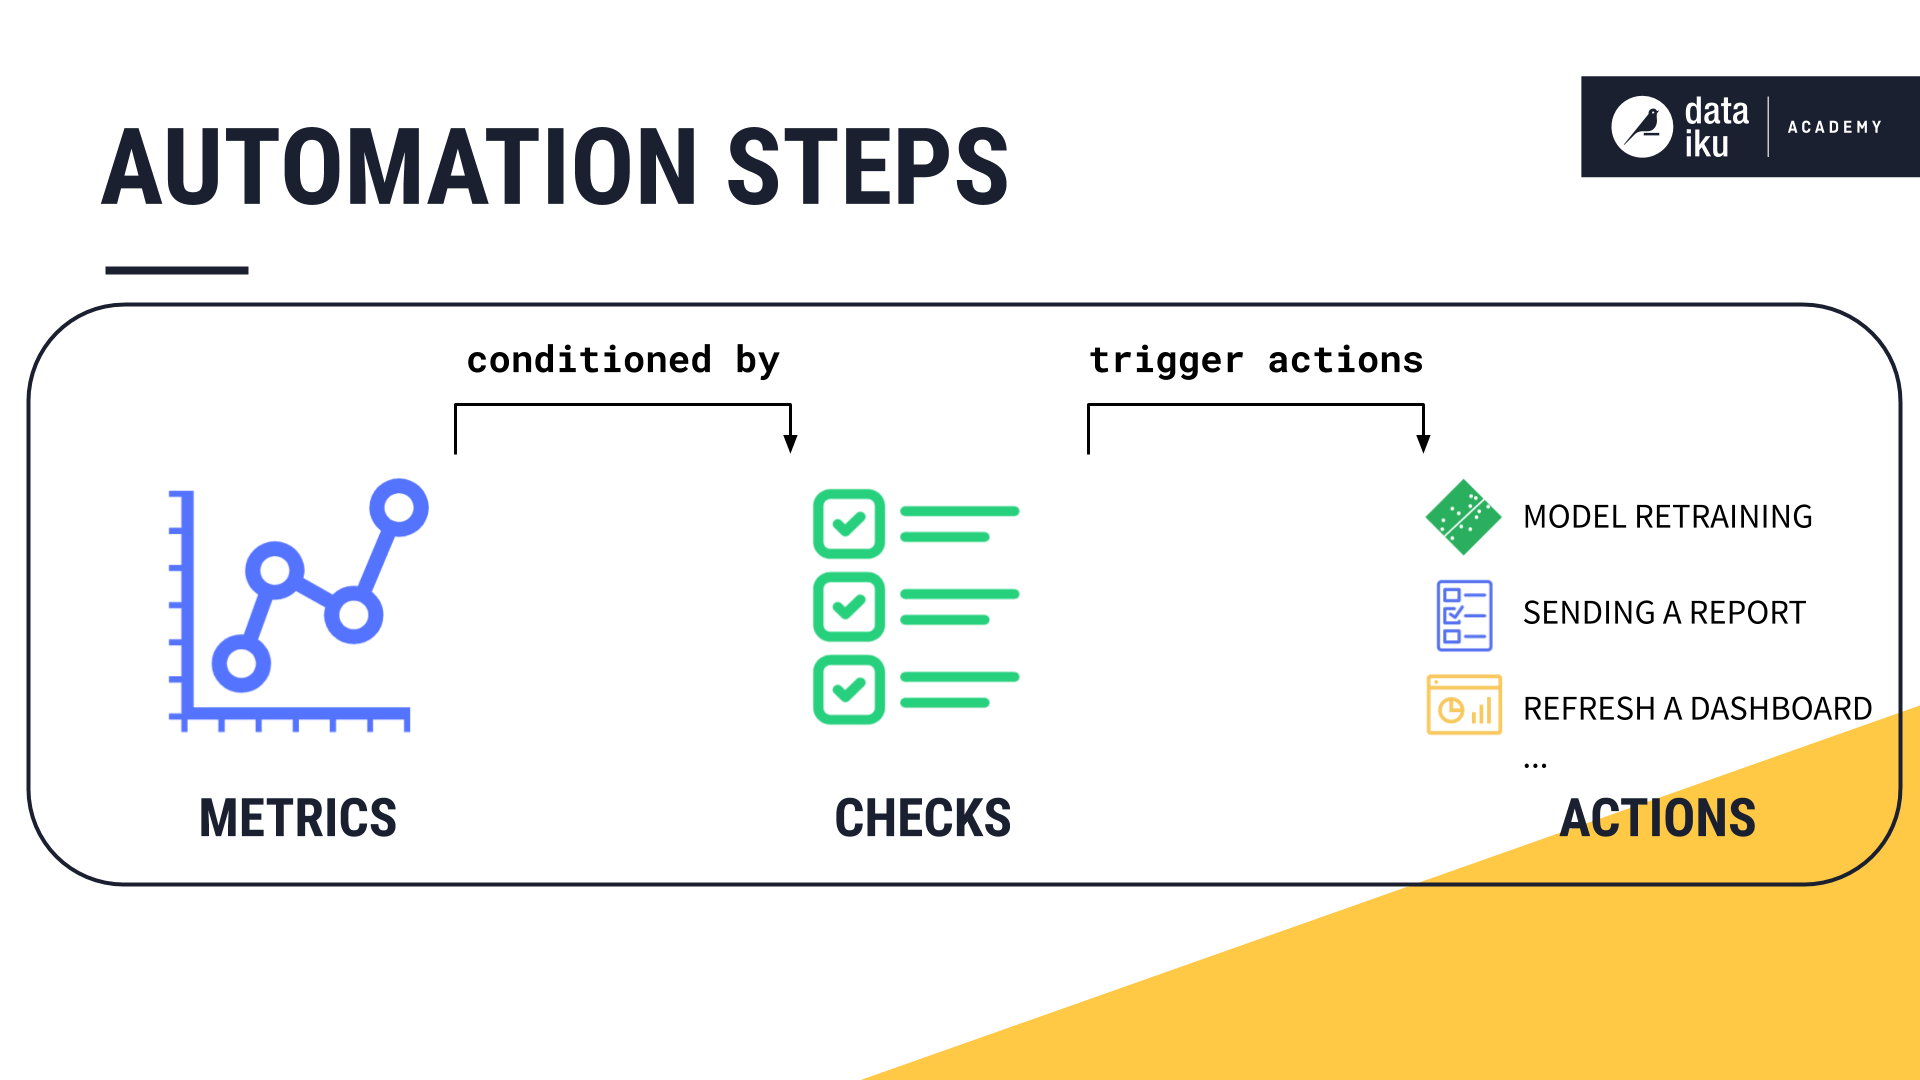 Slide depicting how metrics are conditioned by checks which in turn trigger actions in scenarios.